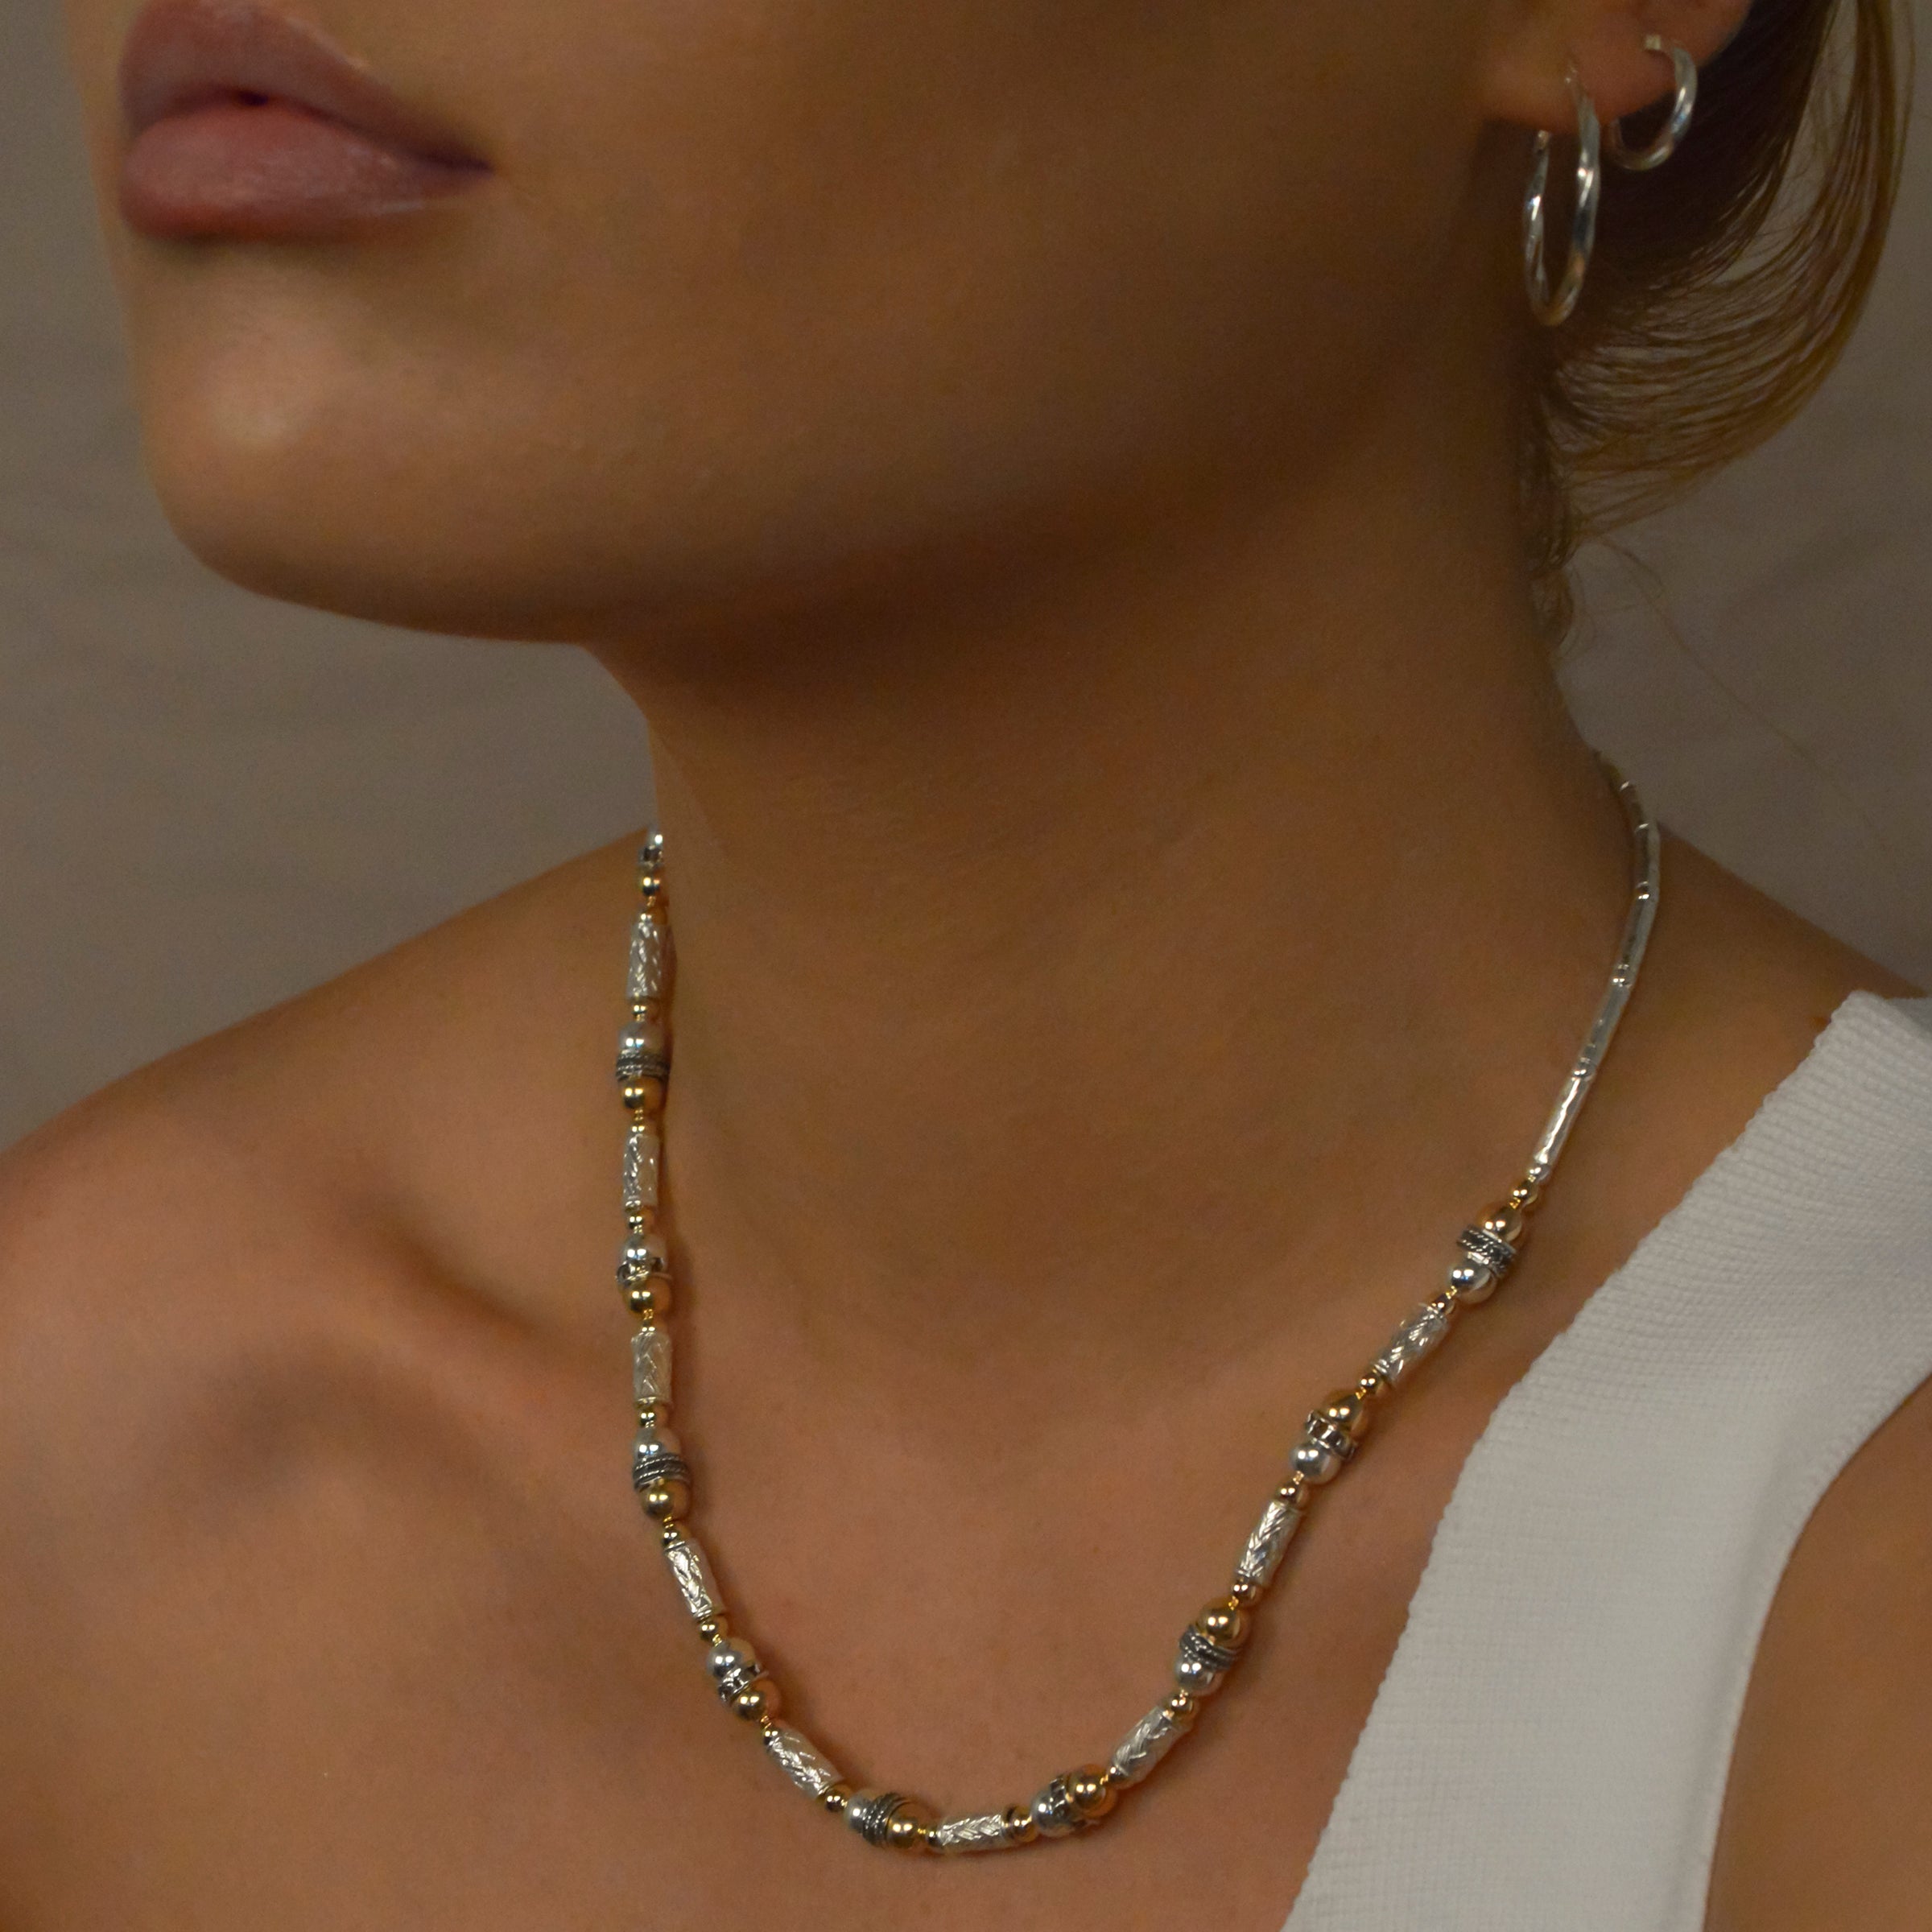 THE TWO TONE FLAT CHAIN NECKLACE – The M Jewelers